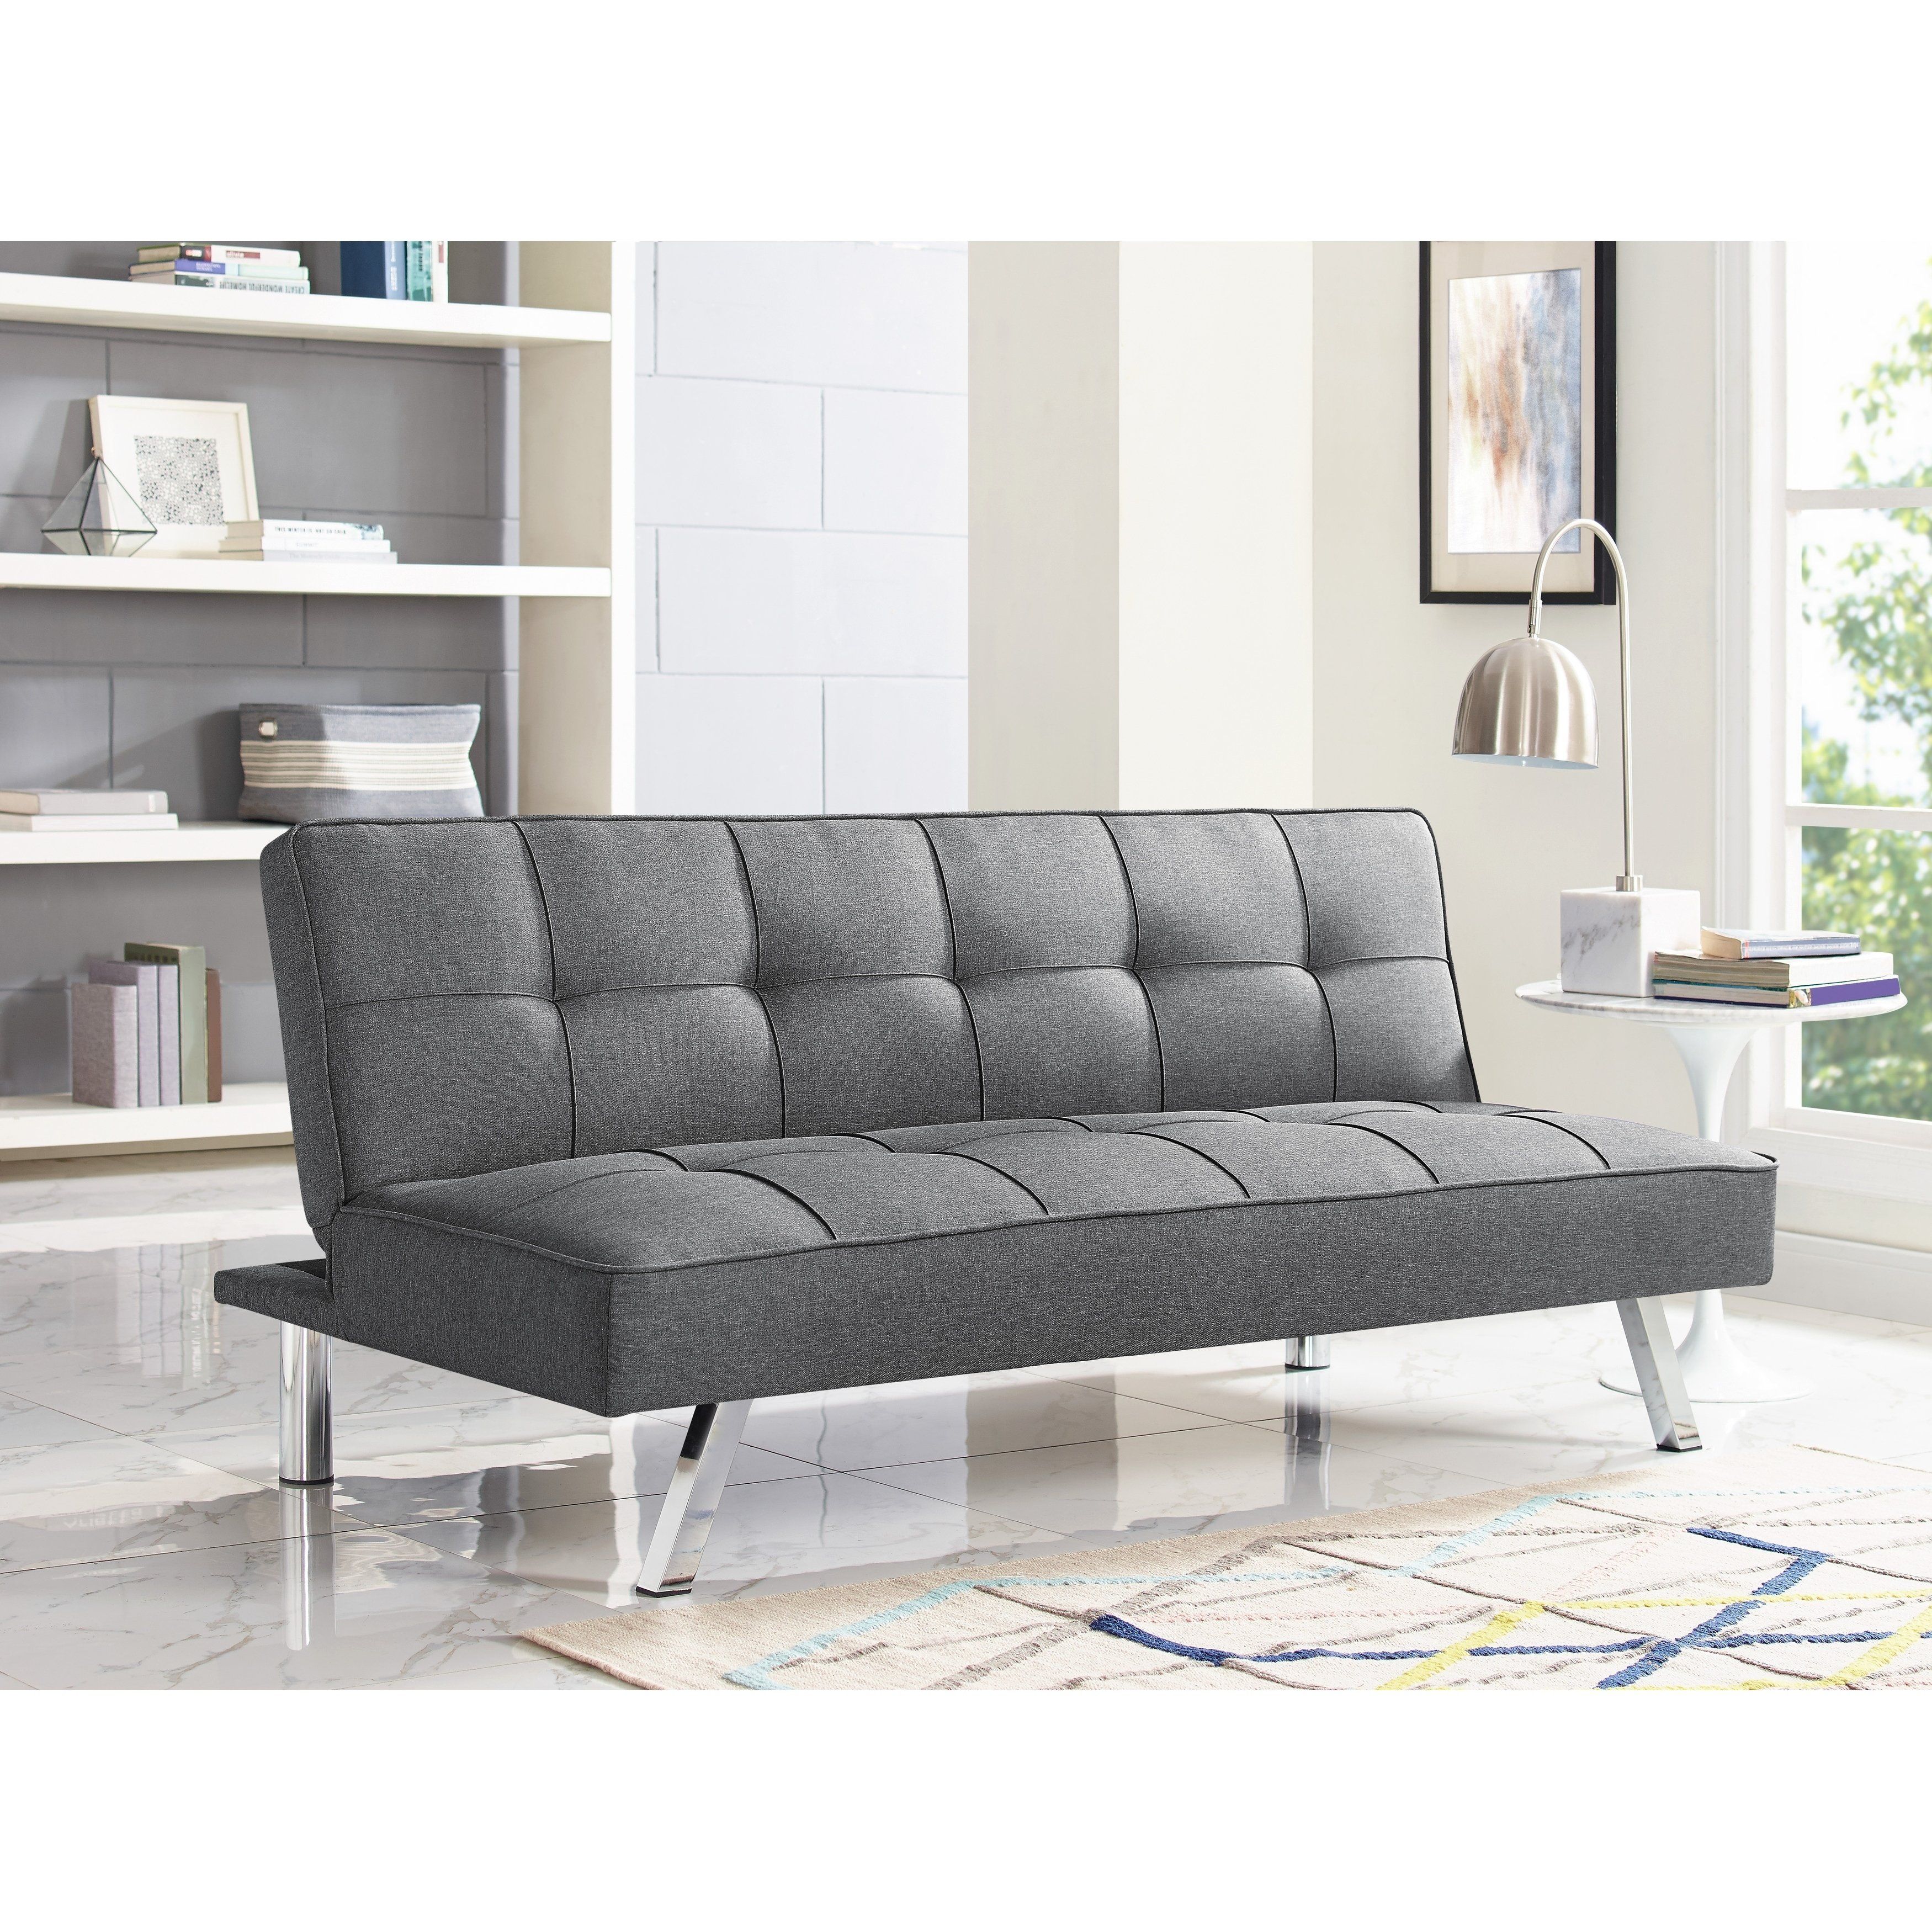 Shop Serta Charlie Tufted Grey Upholstered Convertible Sofa – Free With Cohen Foam Oversized Sofa Chairs (Photo 7 of 20)